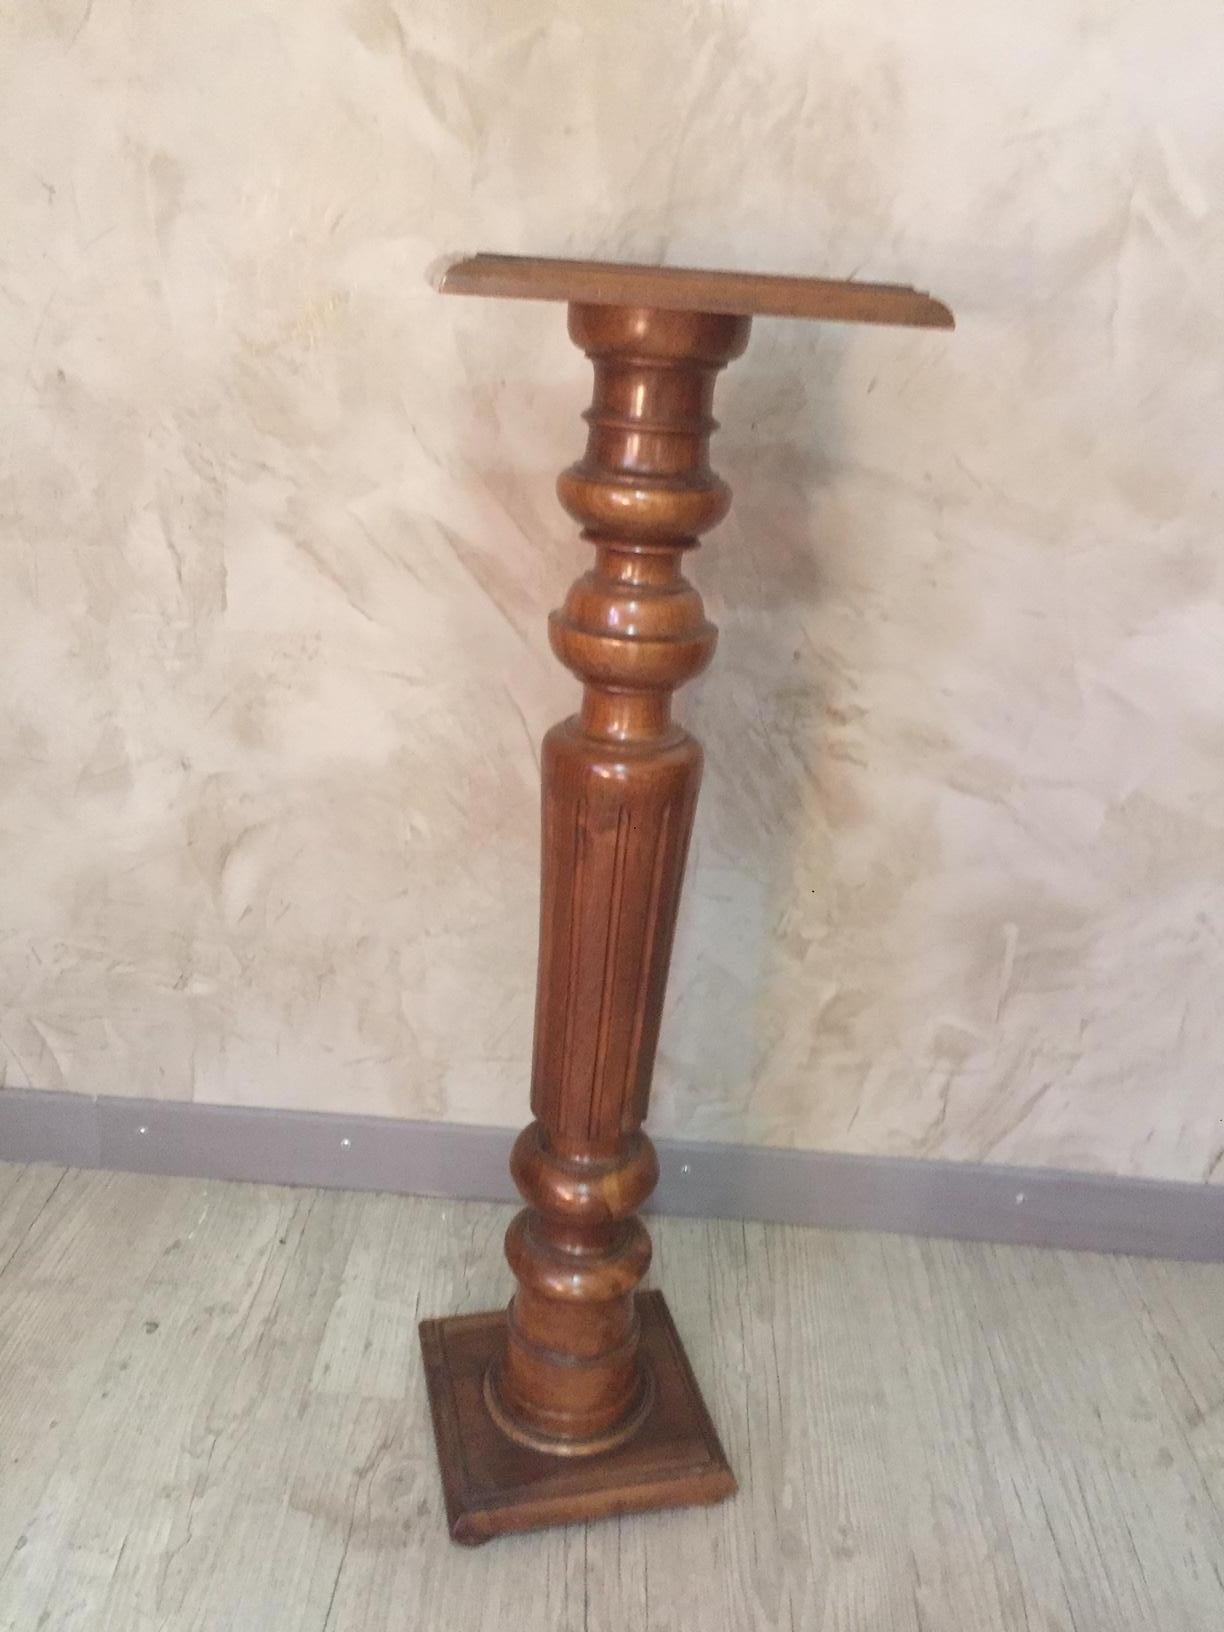 Early 20th century French walnut pedestal from the 1920s. Quiet simple but very good quality and condition.